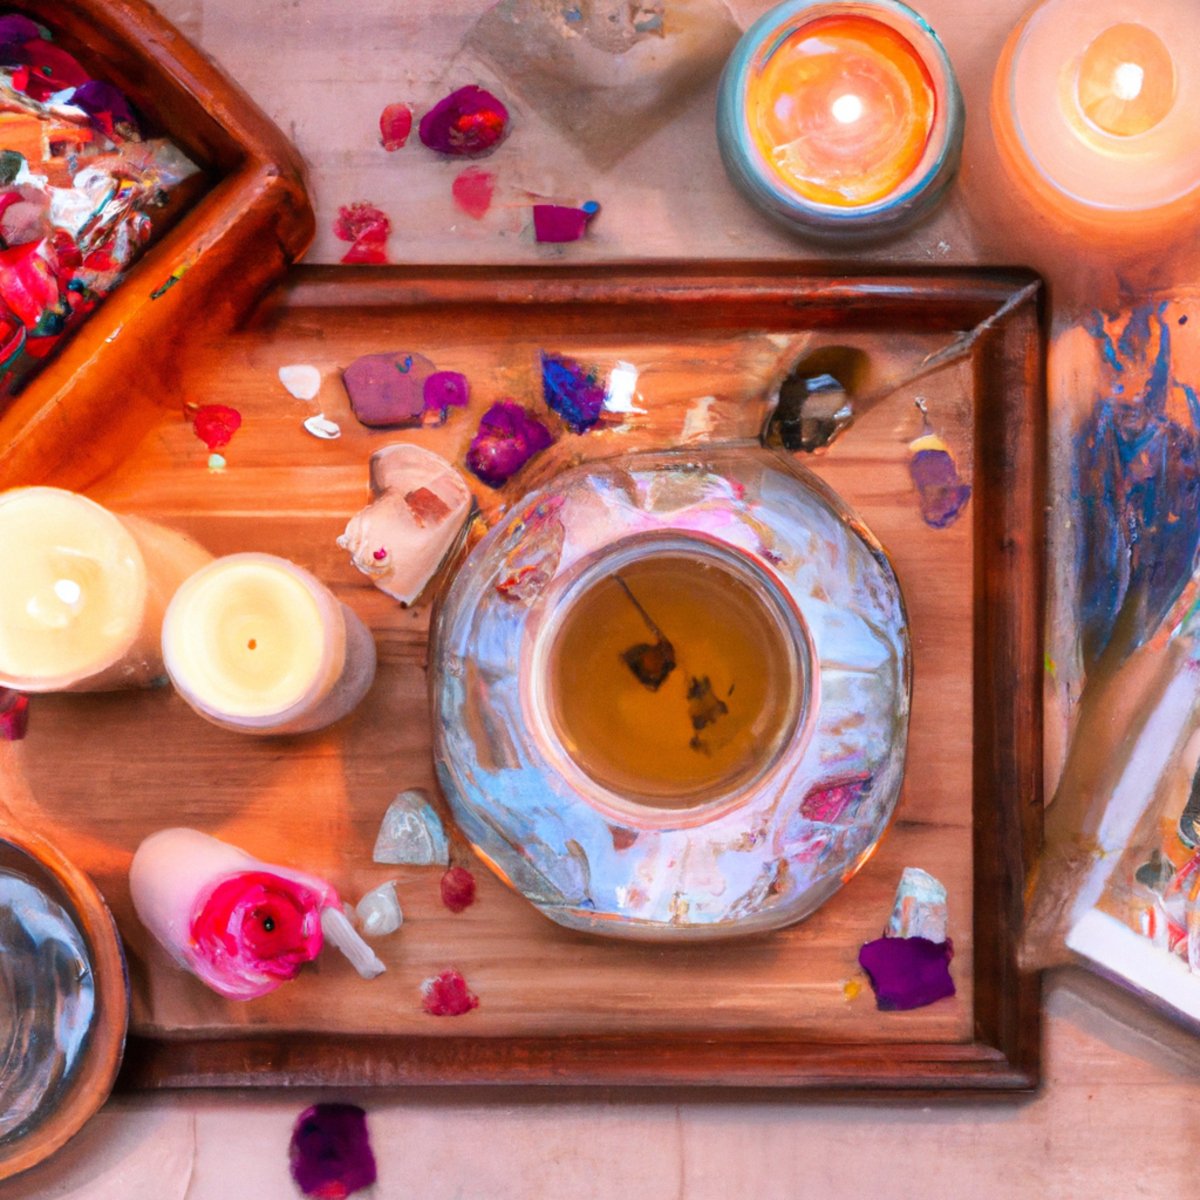 Delicate teacup, rose petals, candle, books, crystal water bottle, silk eye mask, plush cushion, green plant - promoting self-care and inner beauty.